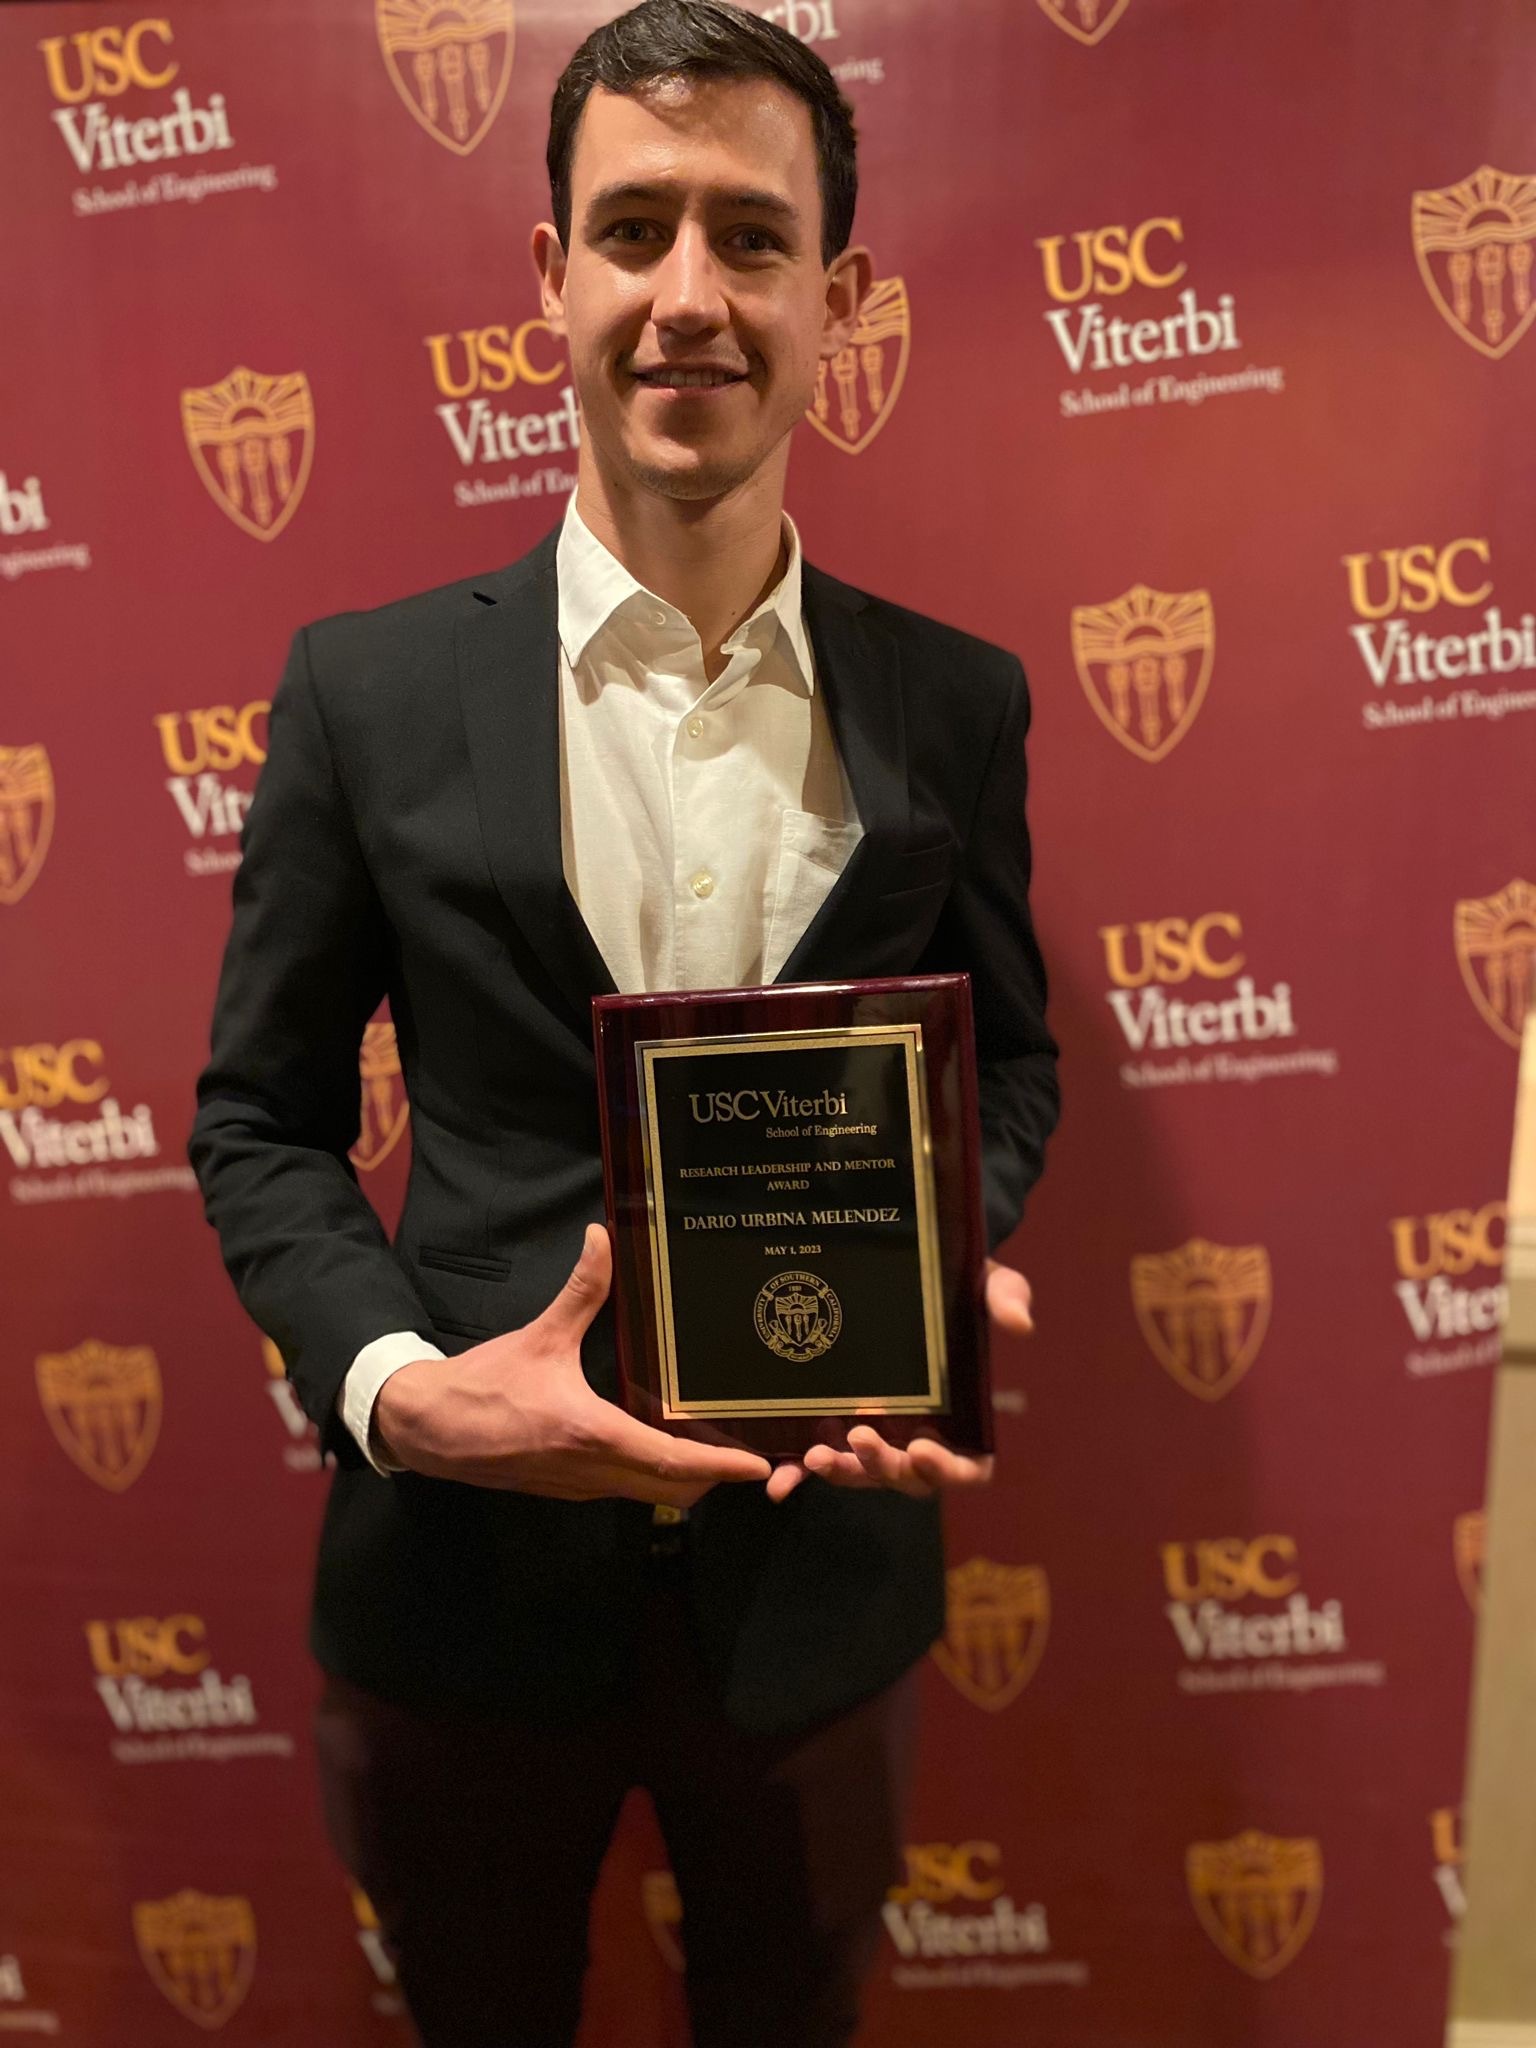 Dario smiles for the camera while holding the 2023 Viterbi Research Leadership and Mentor Award plaque. He is wearing a black suit with a white dress shirt and is standing in front of a red step-and-repeat with the USC Viterbi logo.